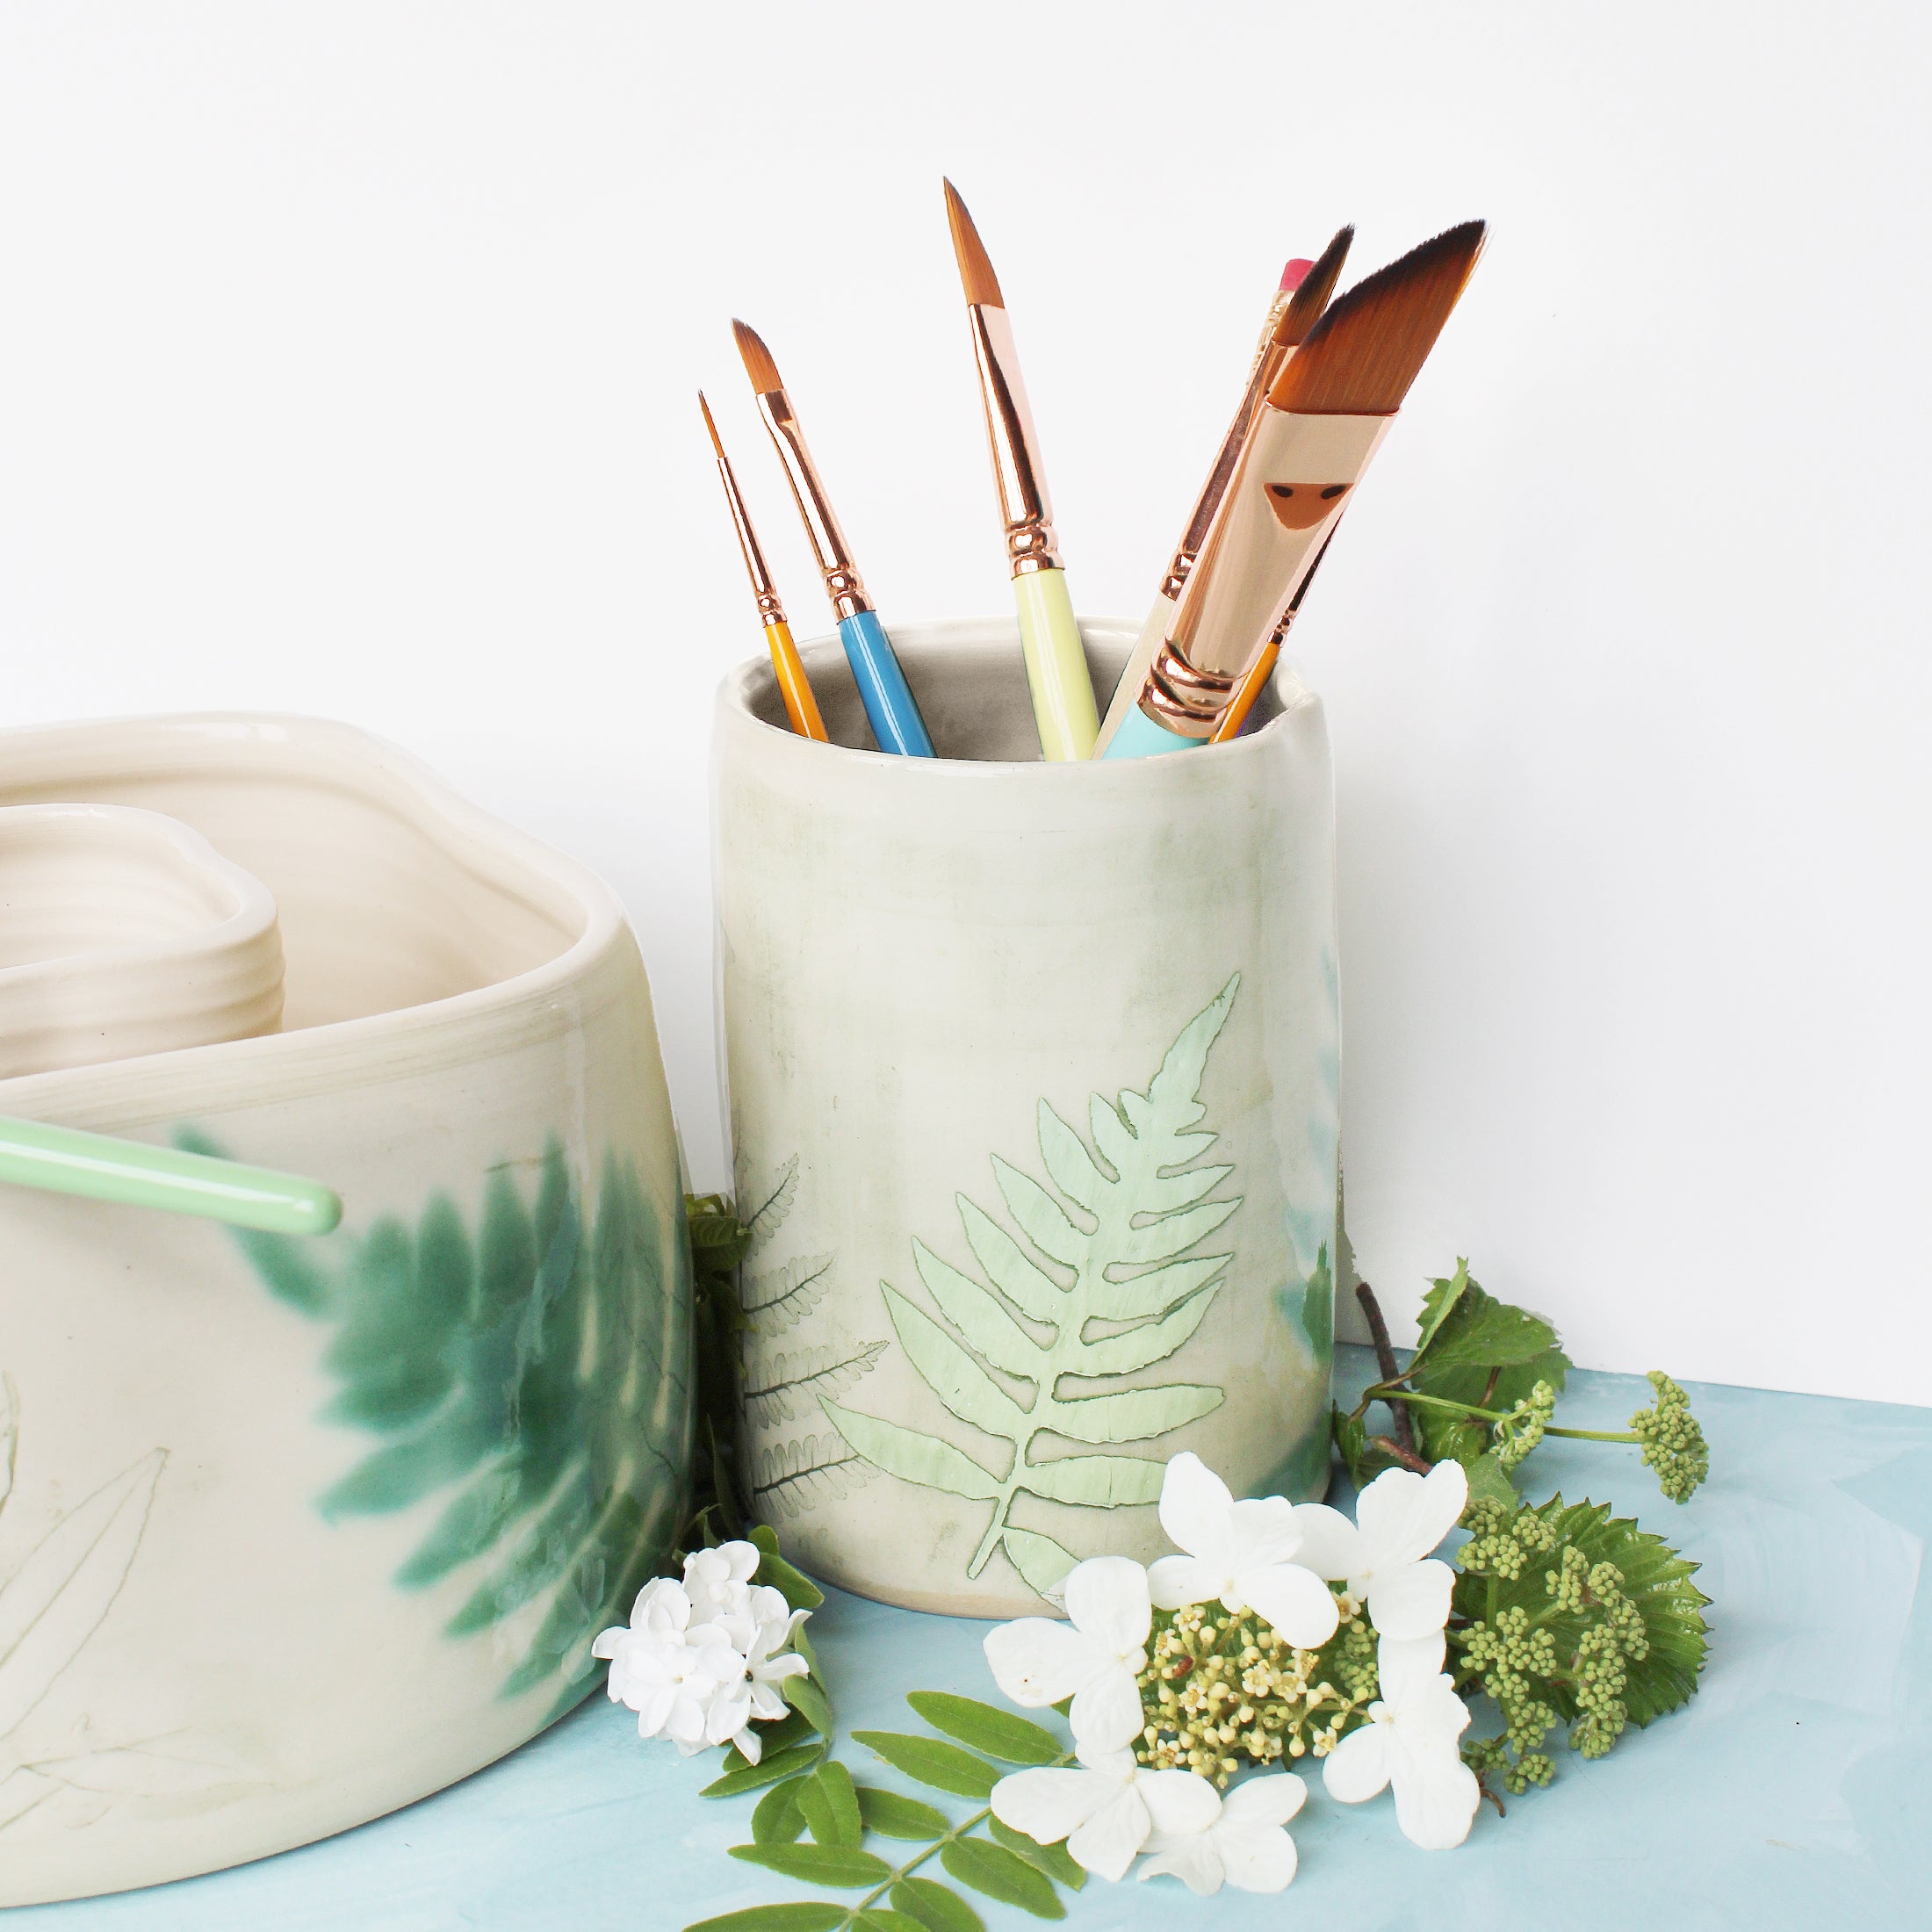 Special Edition Ceramic Brush Holder - Ferns - Unique Shopping for Artistic  Gifts